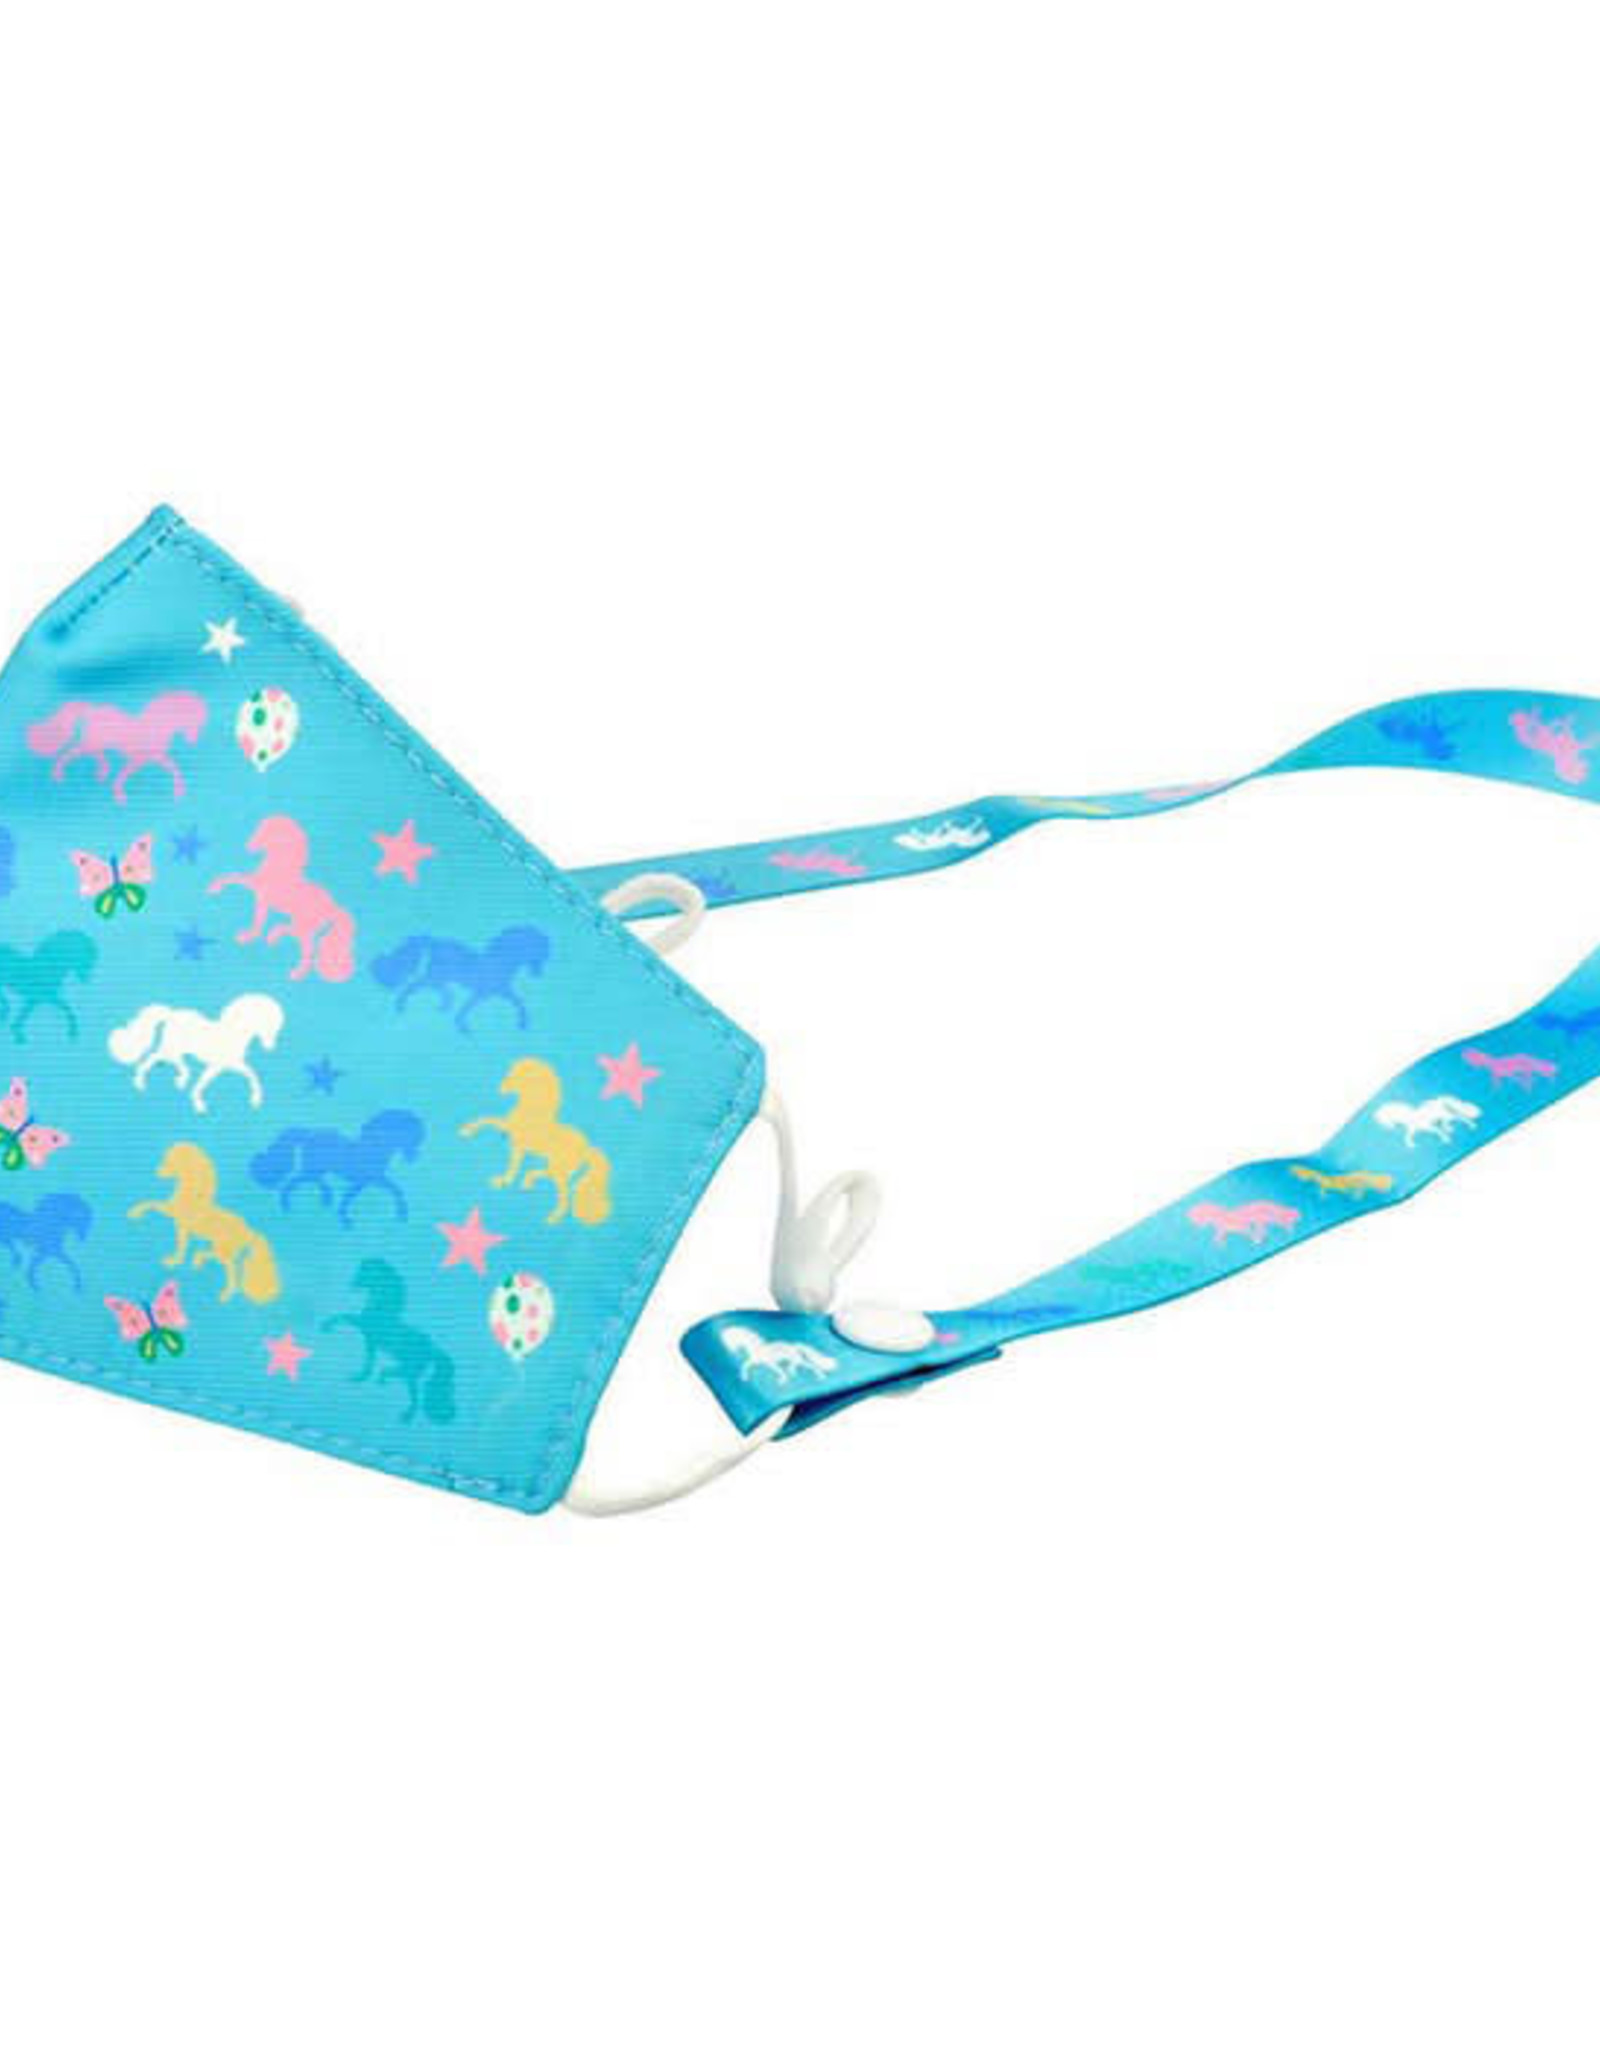 Ponies Kids Face Mask with Lanyard